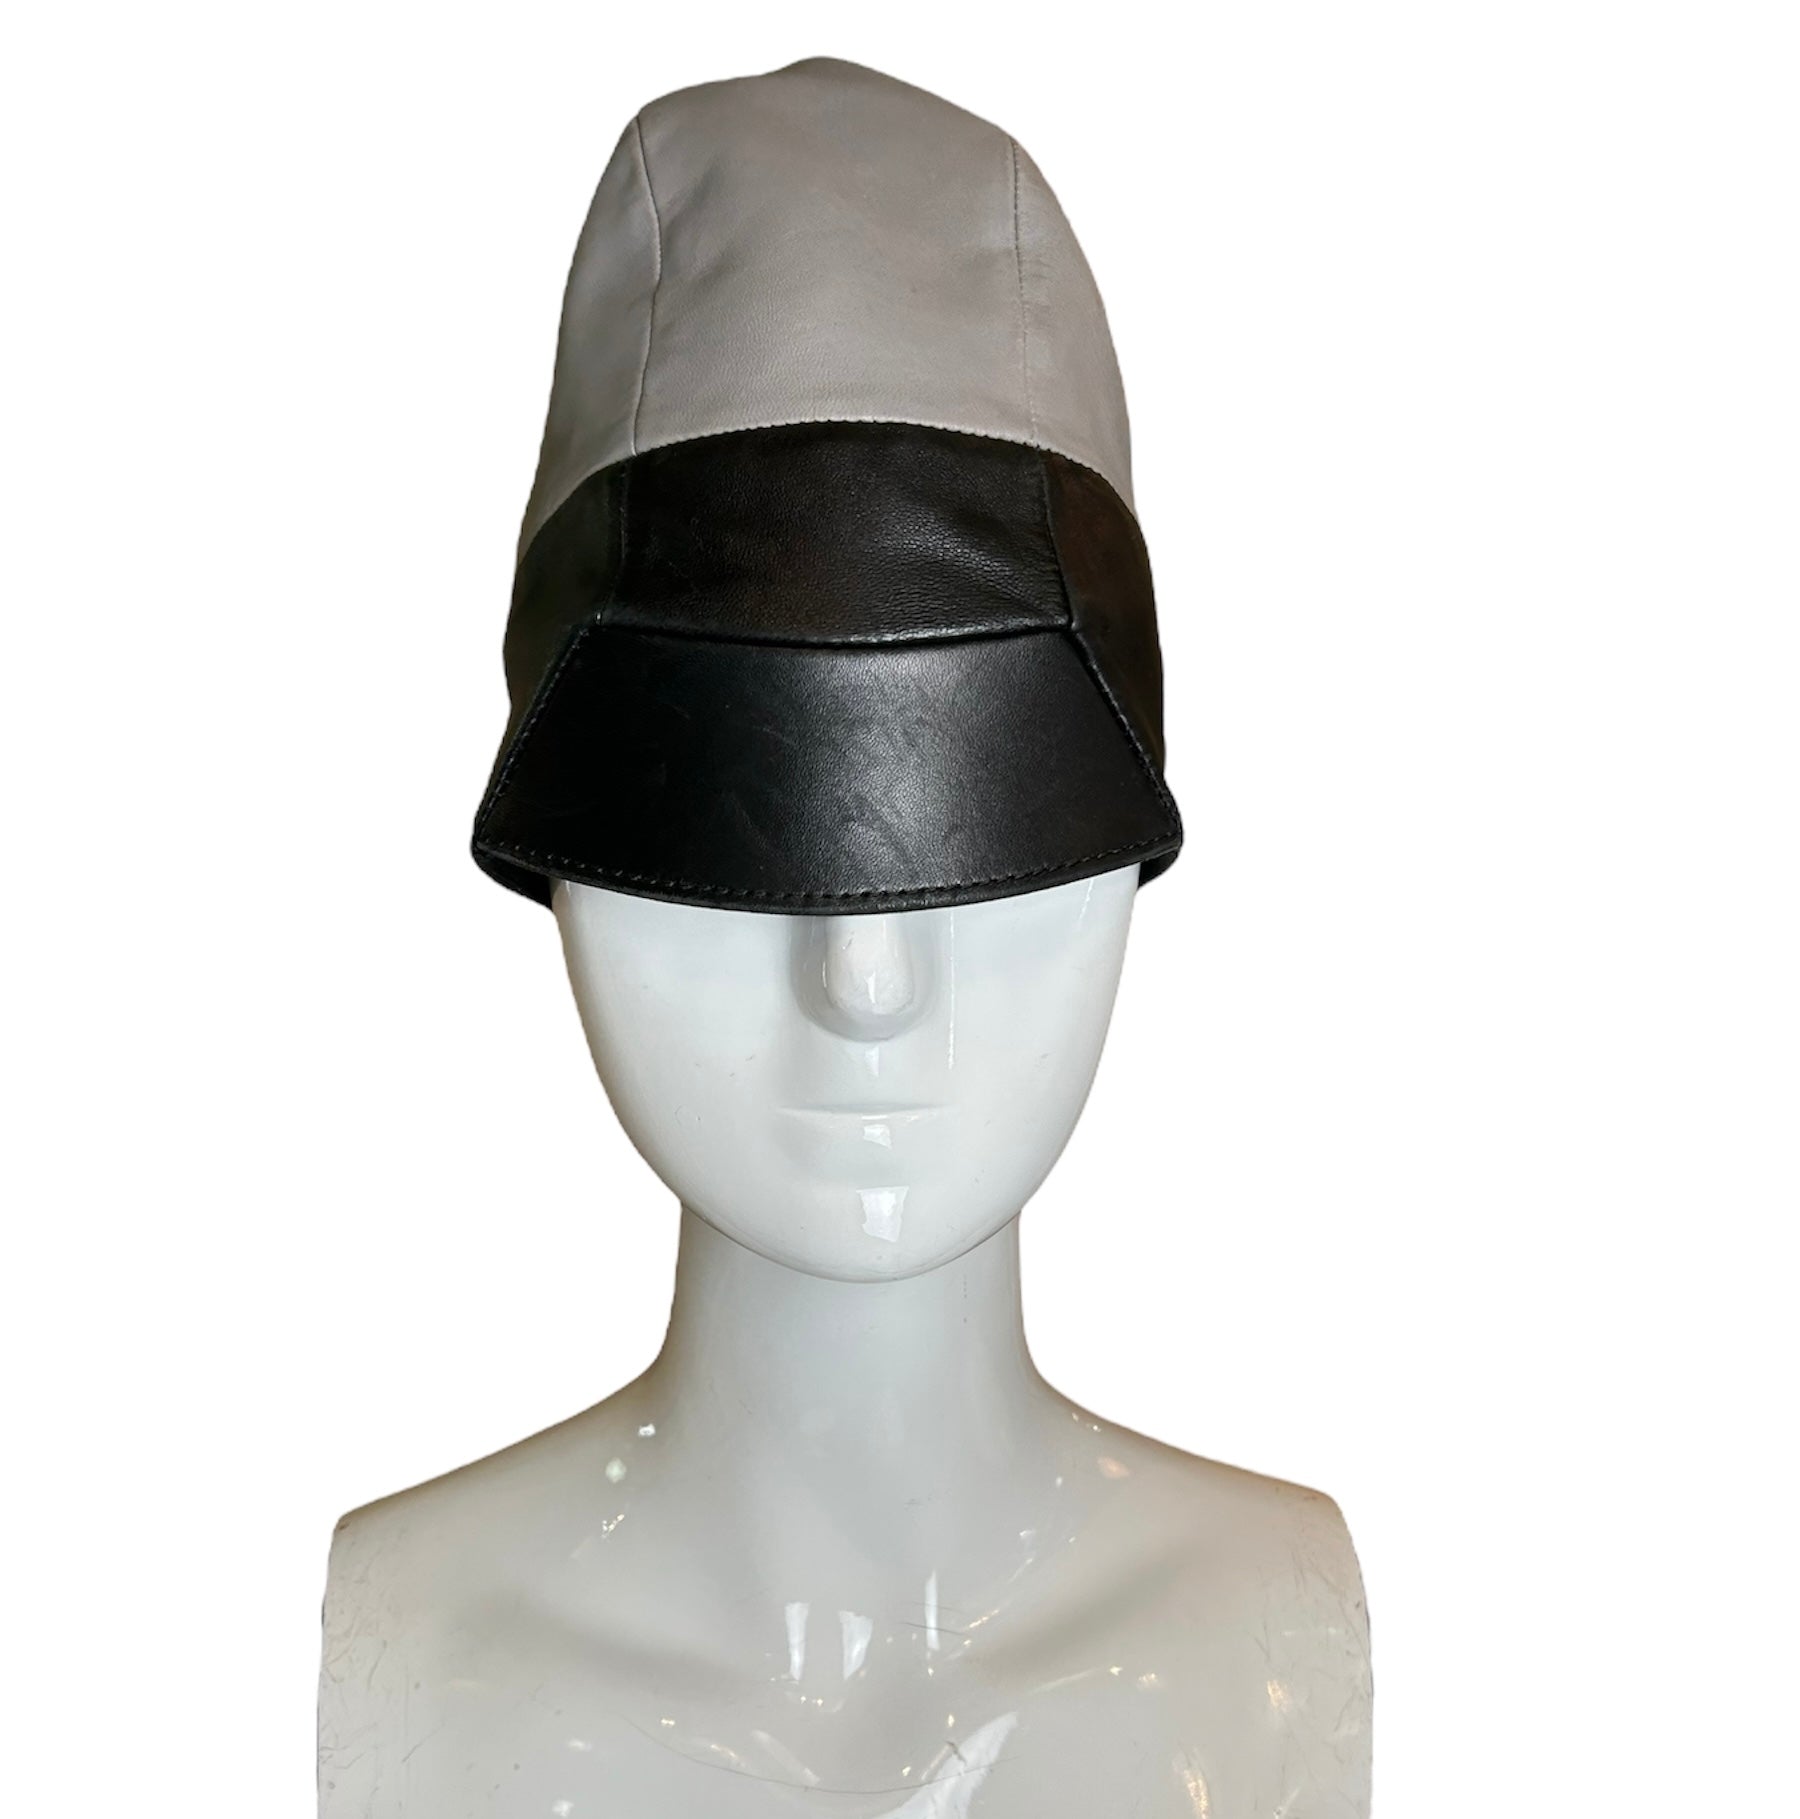 PRADA 60s Inspired Leather Cloche FRONT PHOTO 1 OF 4